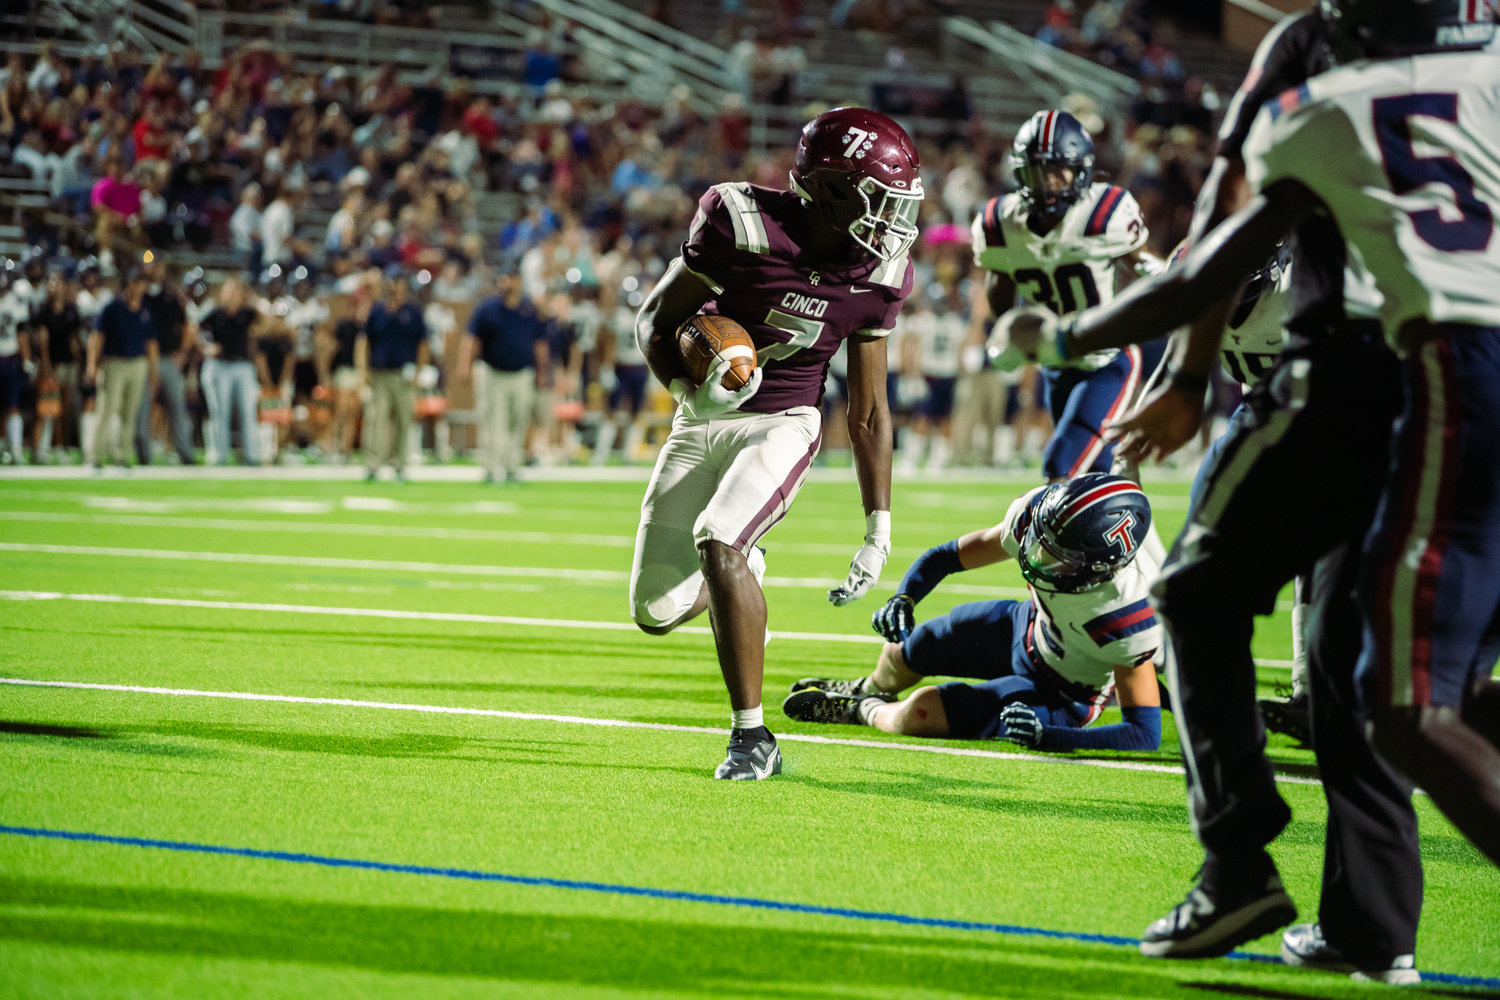 Cinco Ranch’s Sam McKnight runs into the endzone during Friday’s game between Cinco Ranch and Tompkins at Rhodes Stadium.